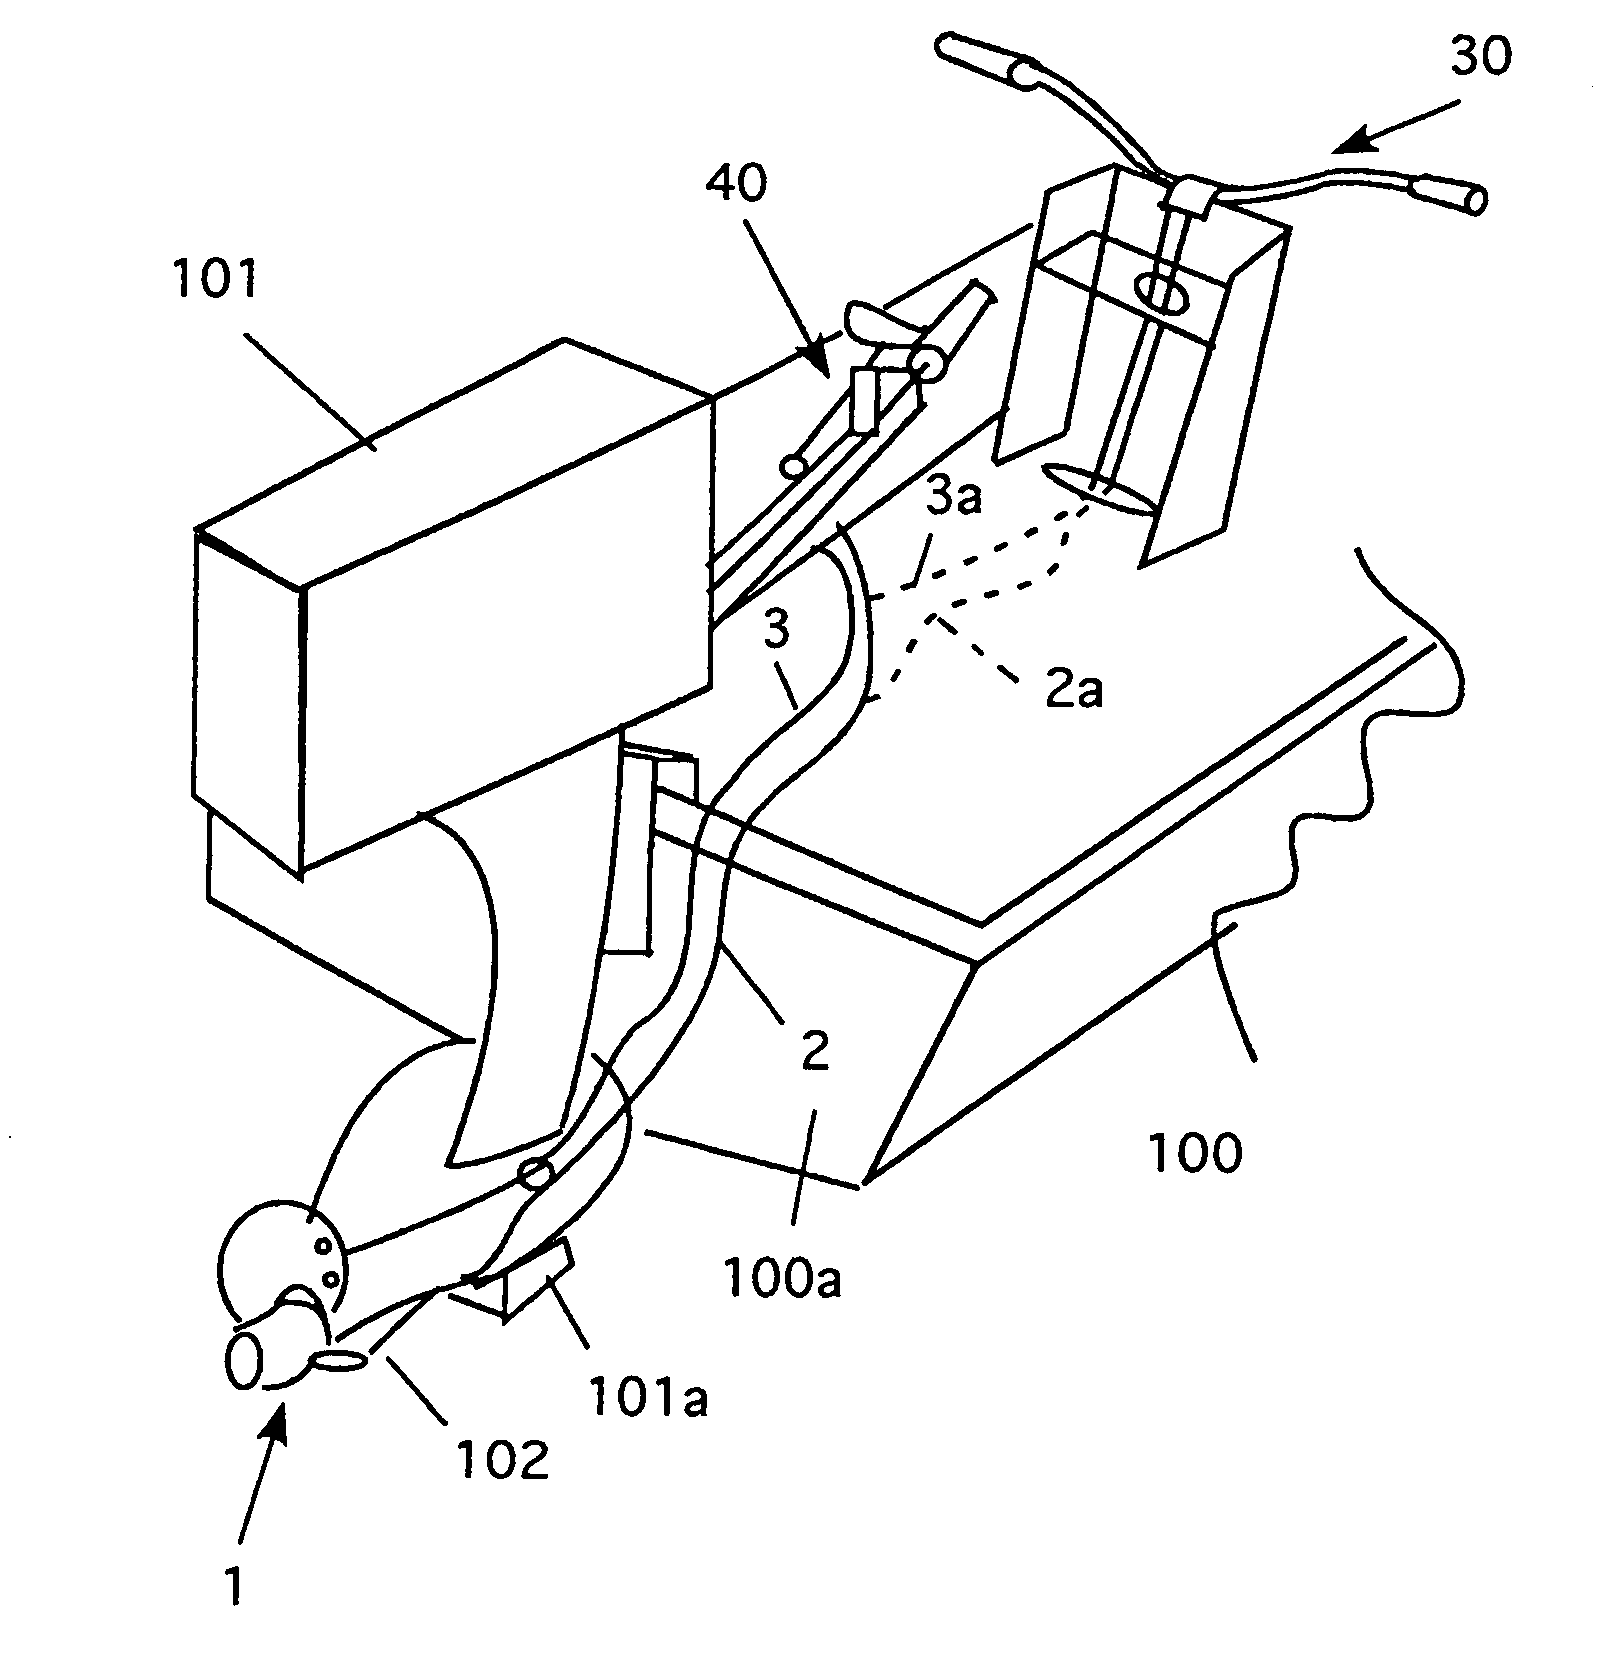 Joy stick control system for a modified steering system for small boat outboard motors